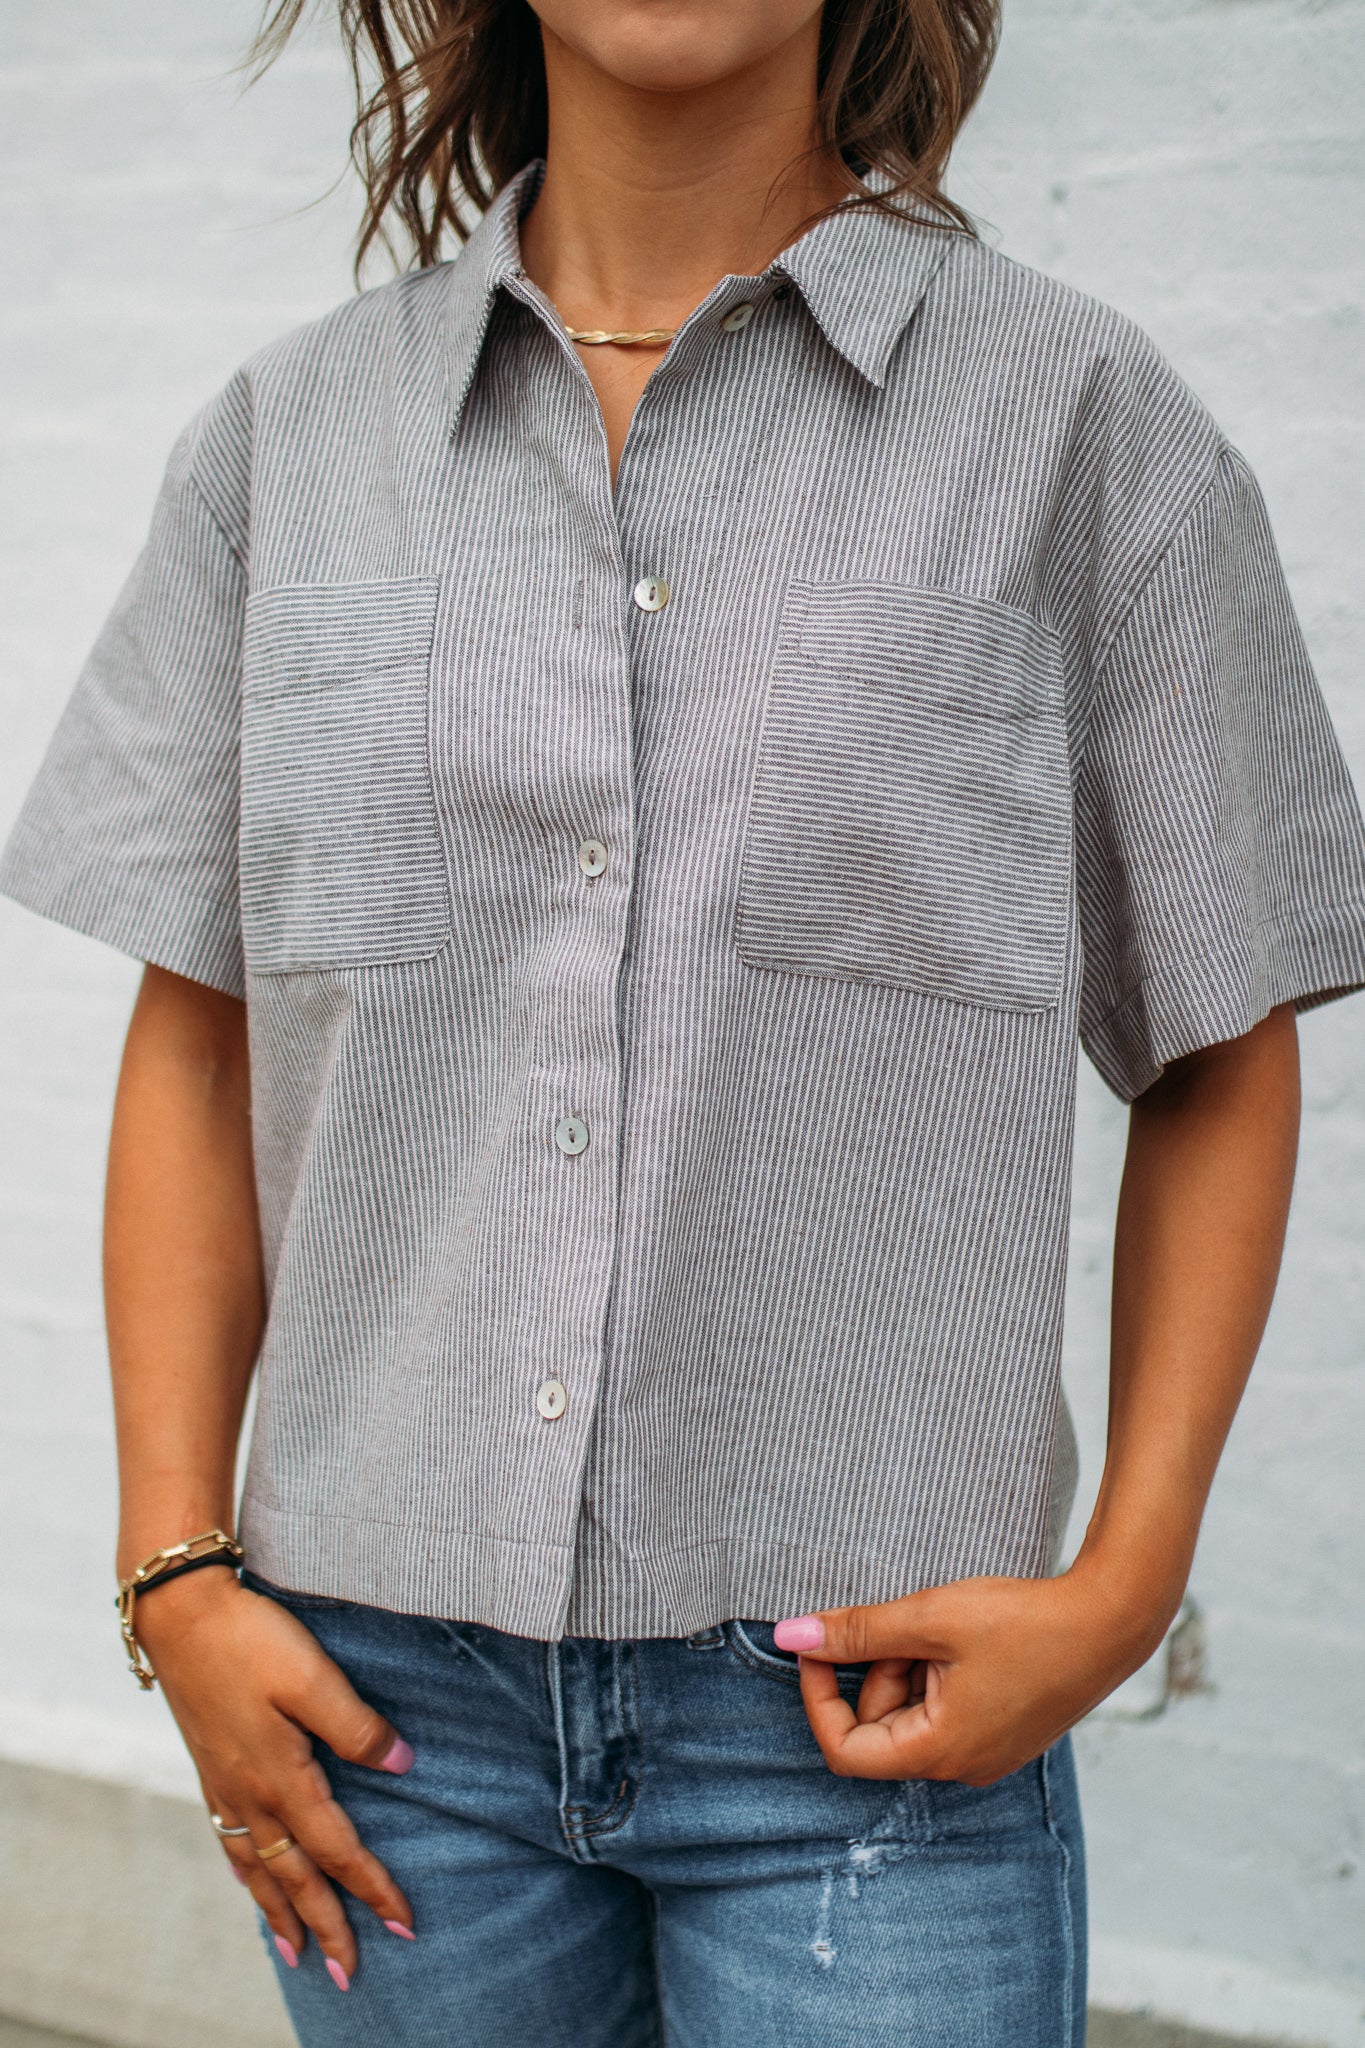 Thinking About It Linen Top